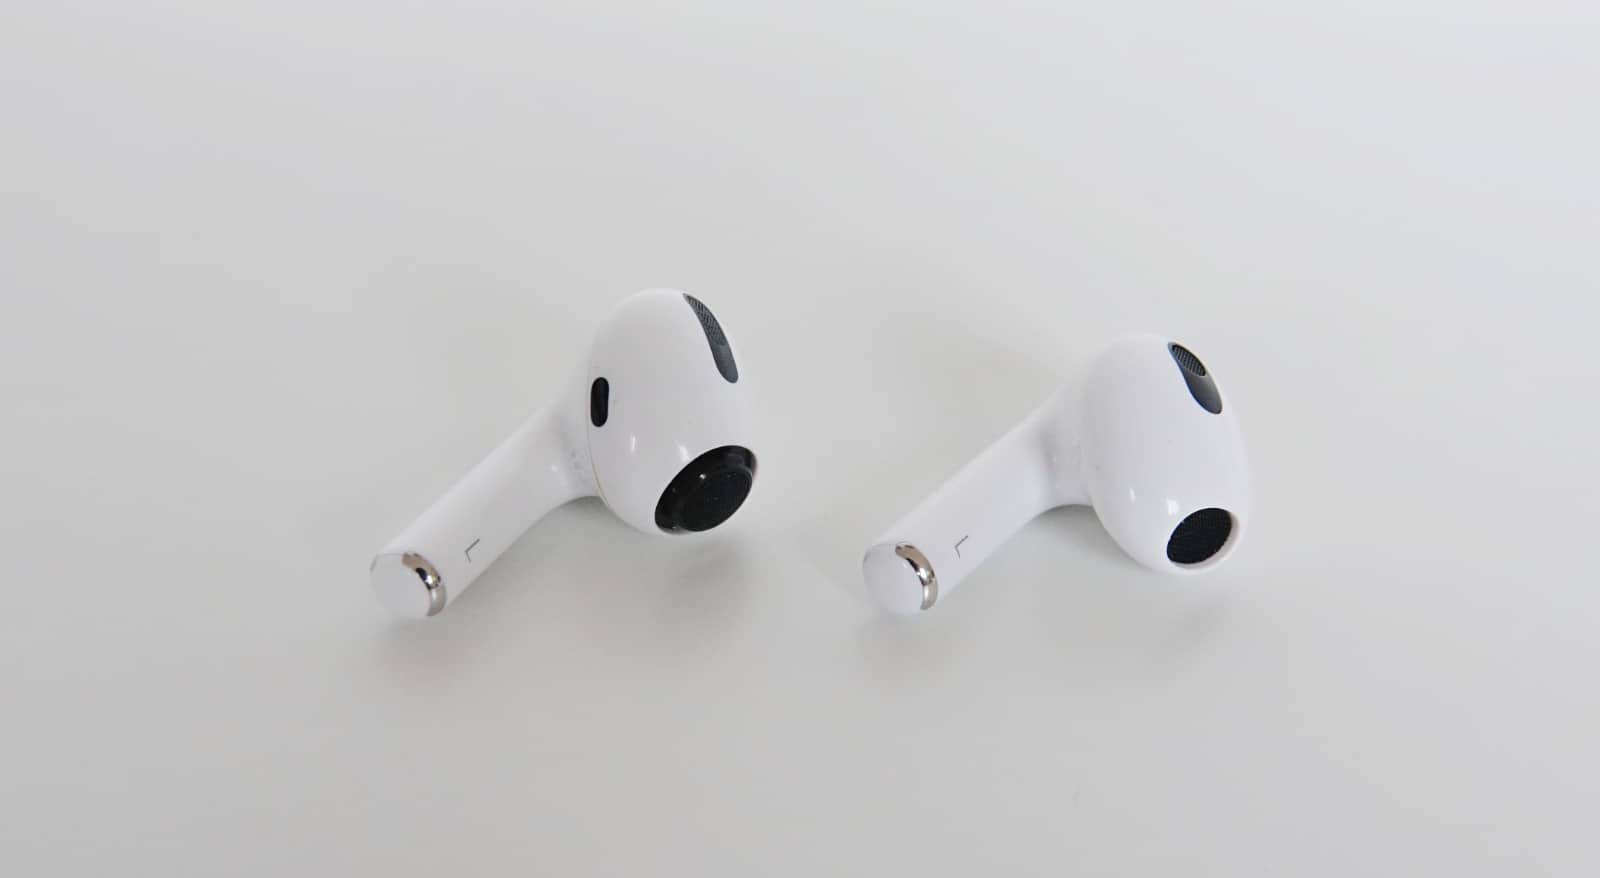 AirPods Pro (left) next to AirPods 3 (right)